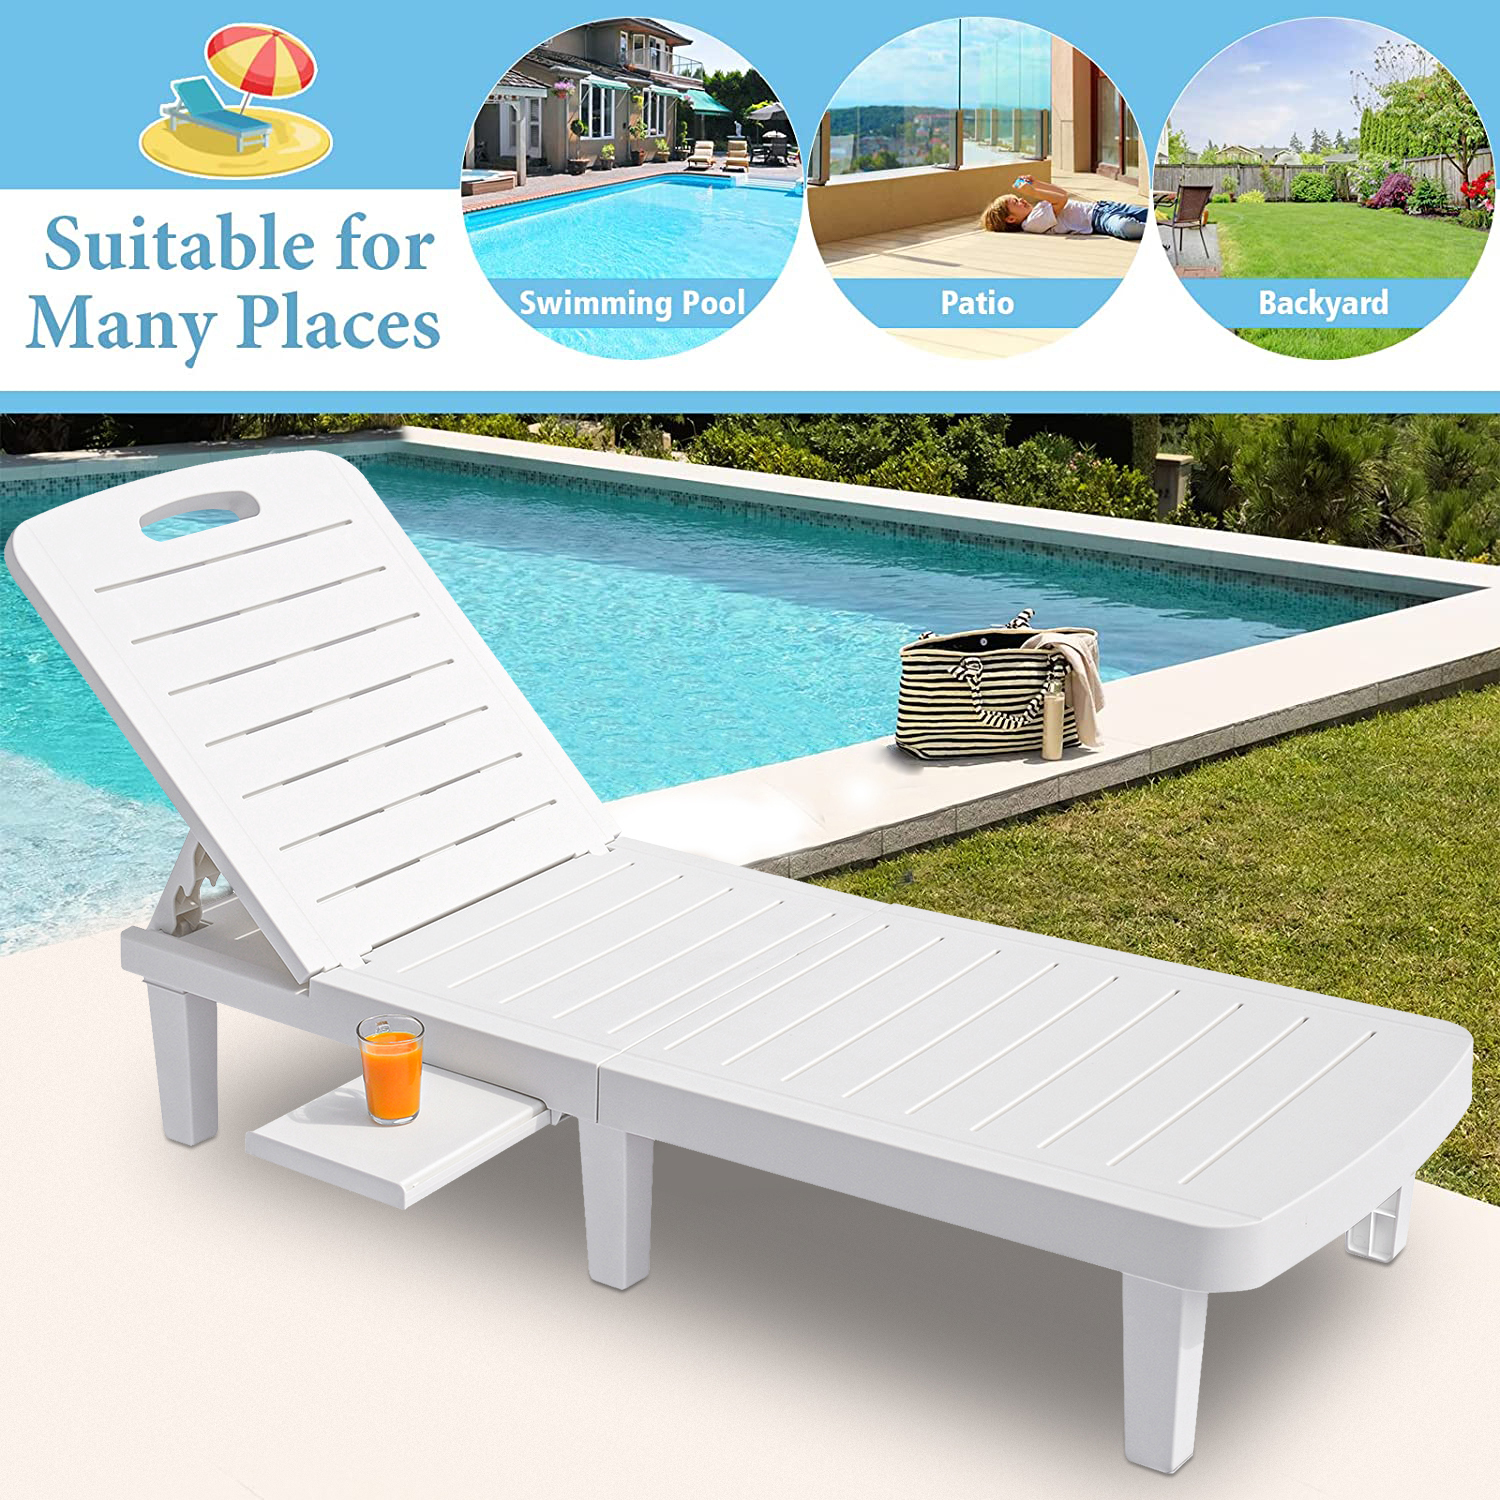 Set of 2 Patio Chaise Lounge, Outdoor Pool Lounge Chair for 2, Layout Chair Outdoor Furniture Adjustable with 5 Positions | Side Table | Max Weight Capacity 330 lbs White - image 5 of 11